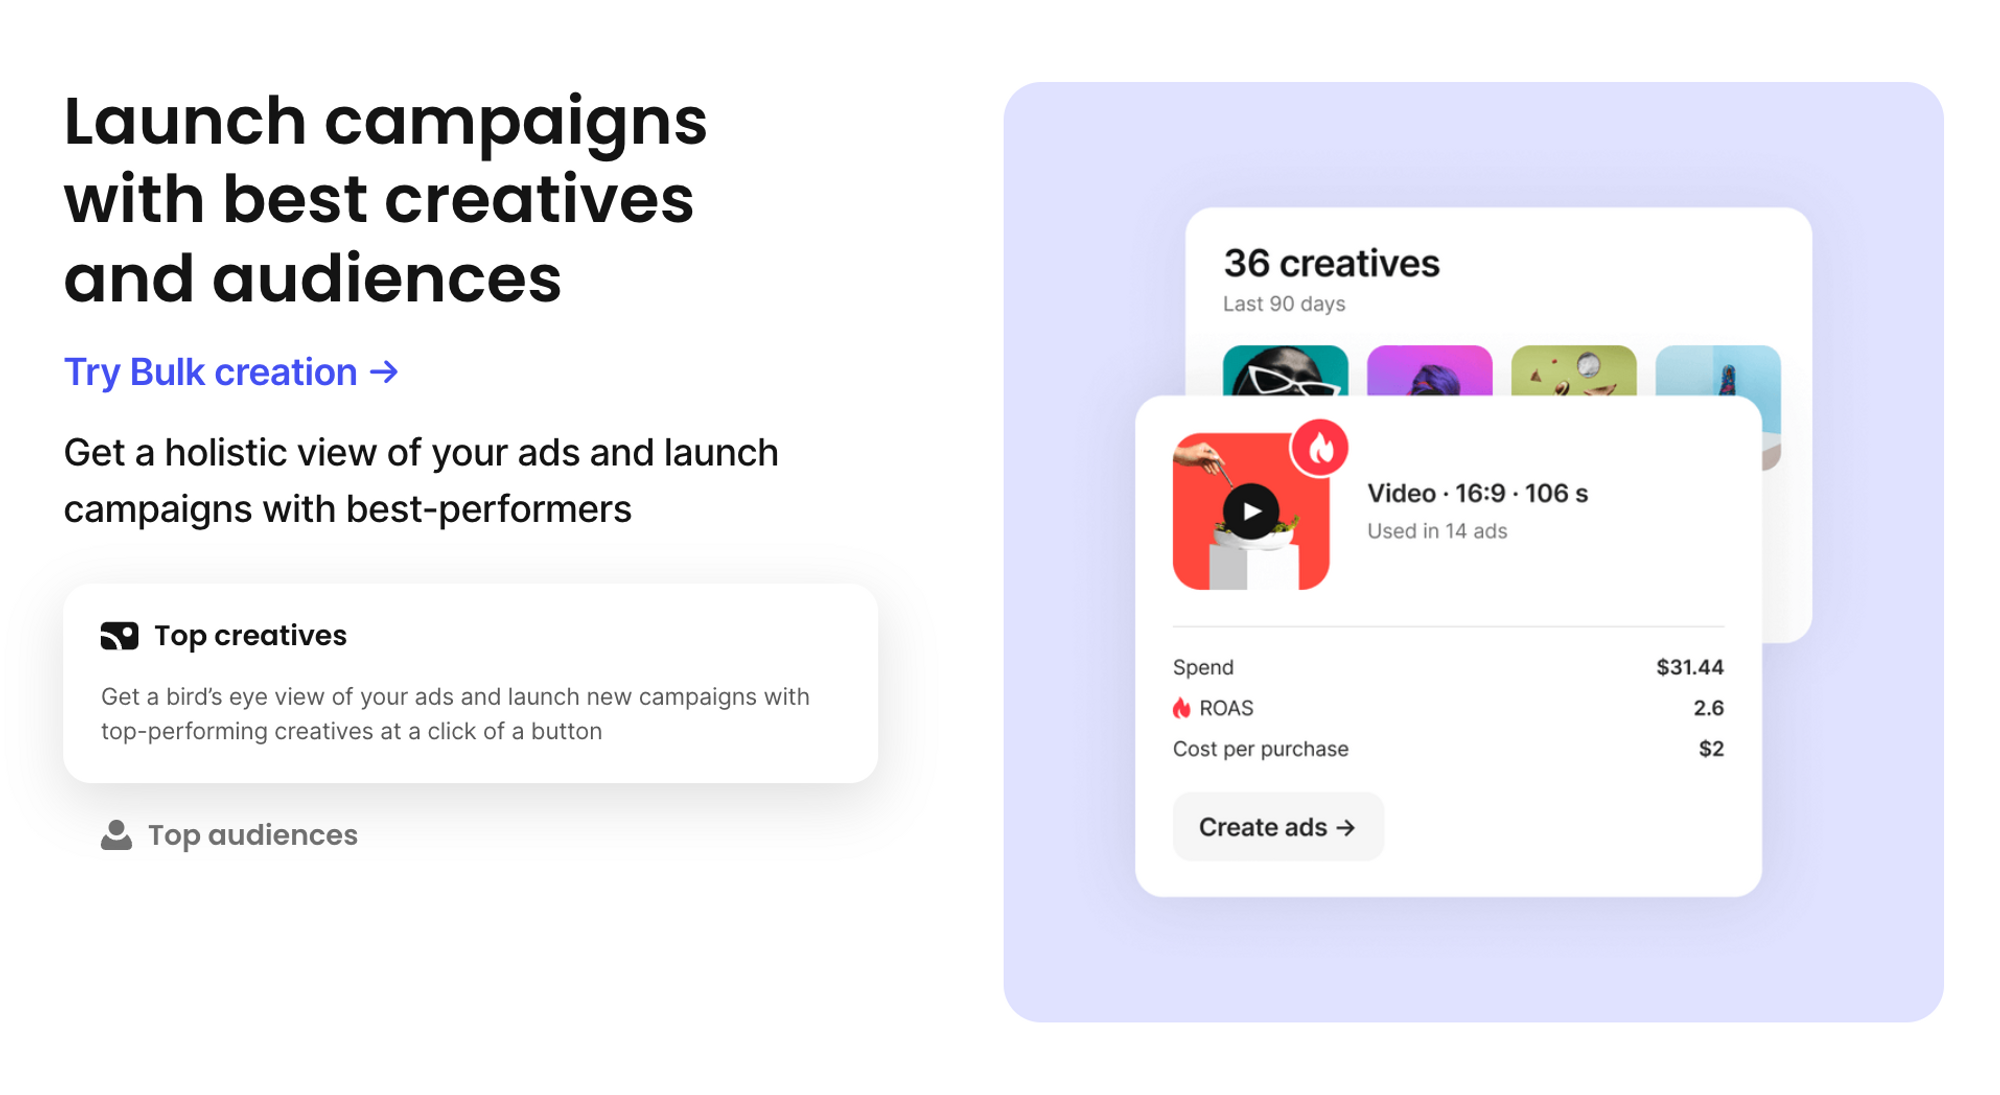 Get a bird’s eye view of your ads and launch new campaigns with top-performing creatives and audiences at a click of a button